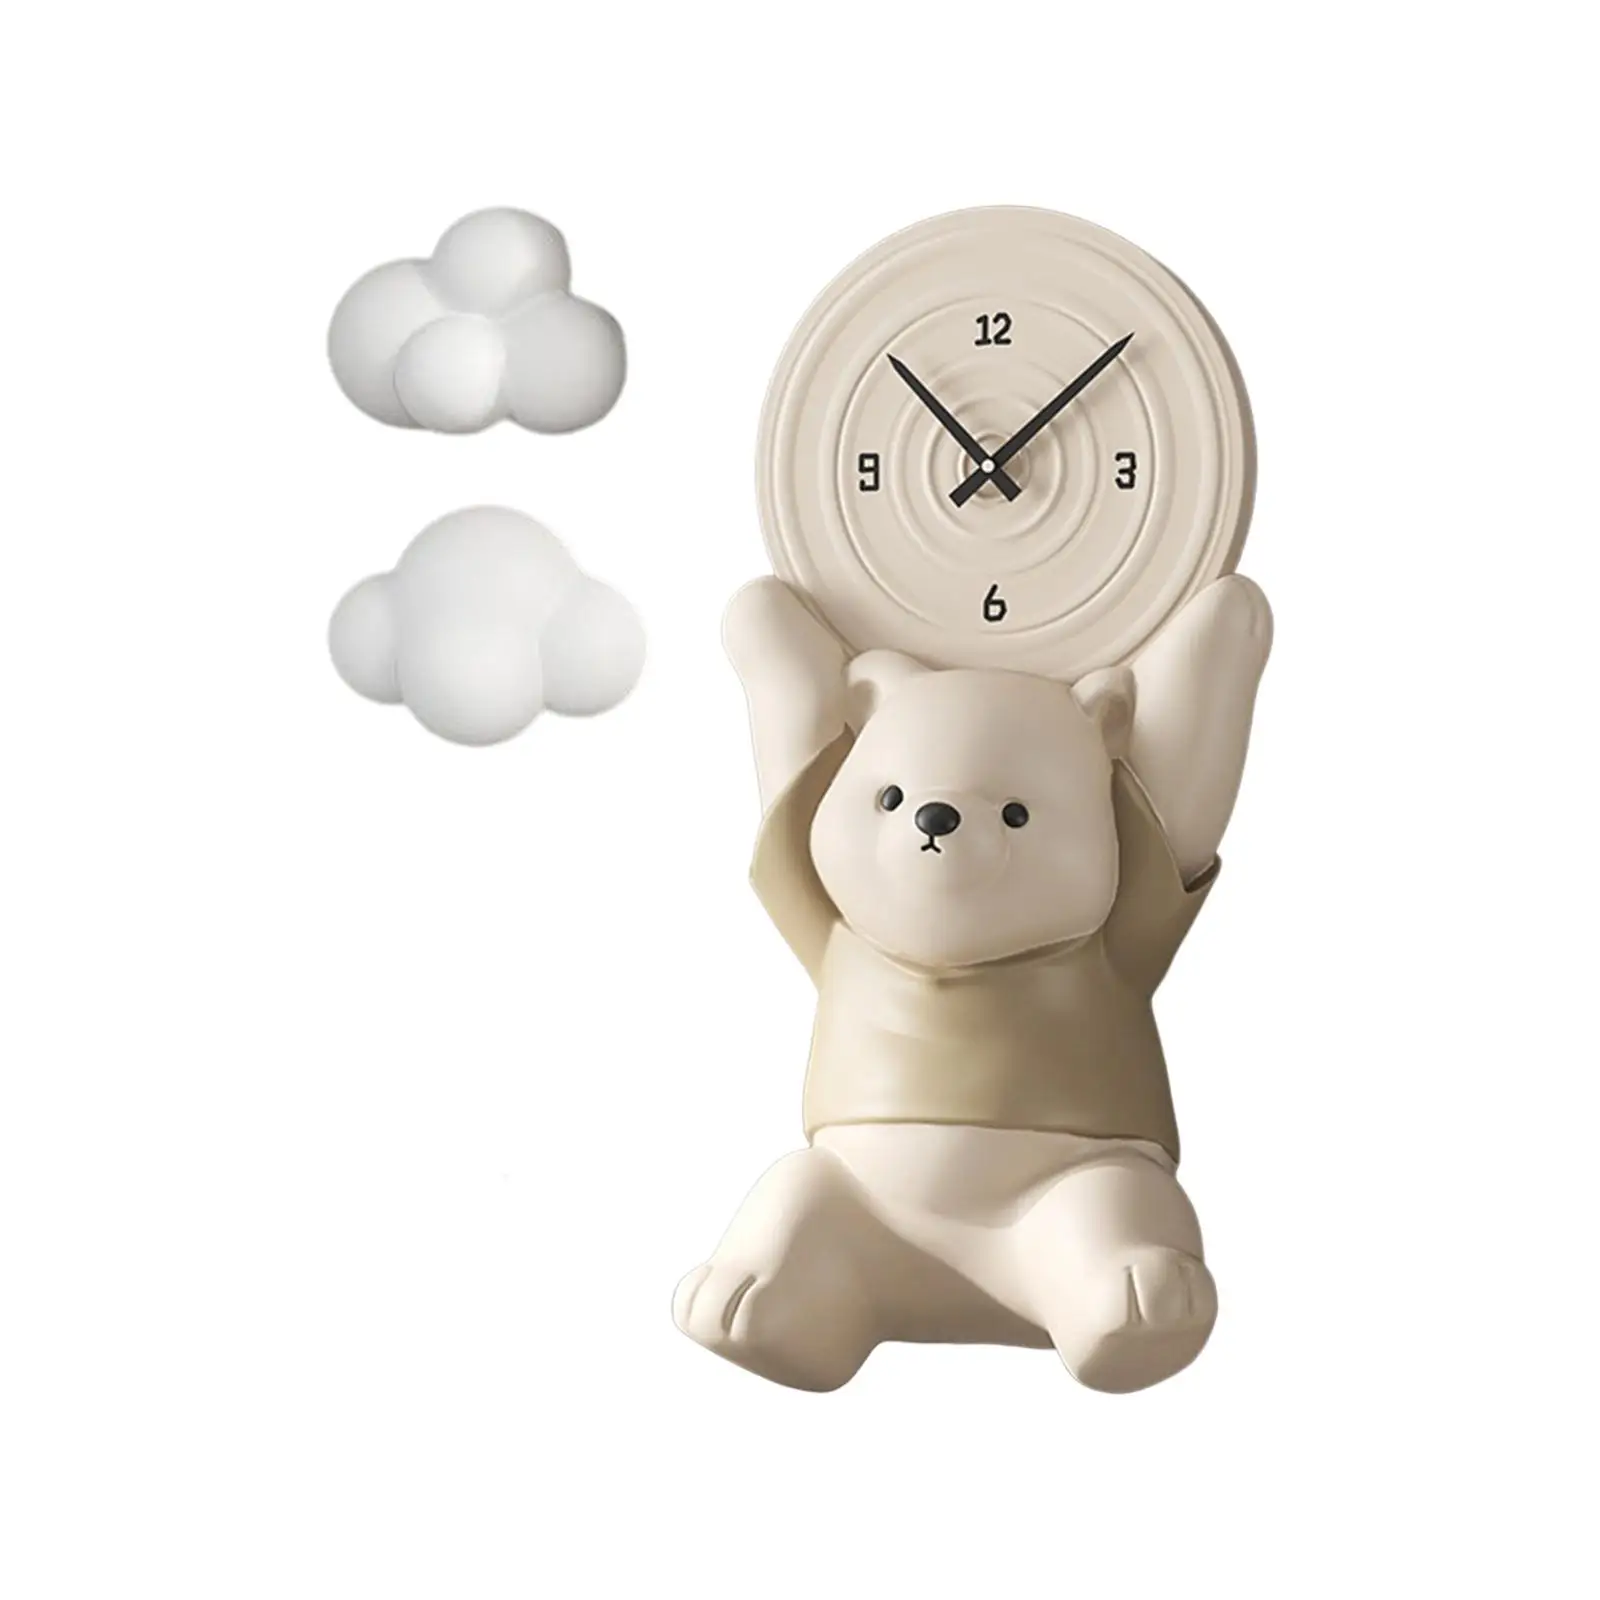 Bear Figurine Wall Clock Resin Hanging Ornament Decorative Exquisite Artwork for Living Room